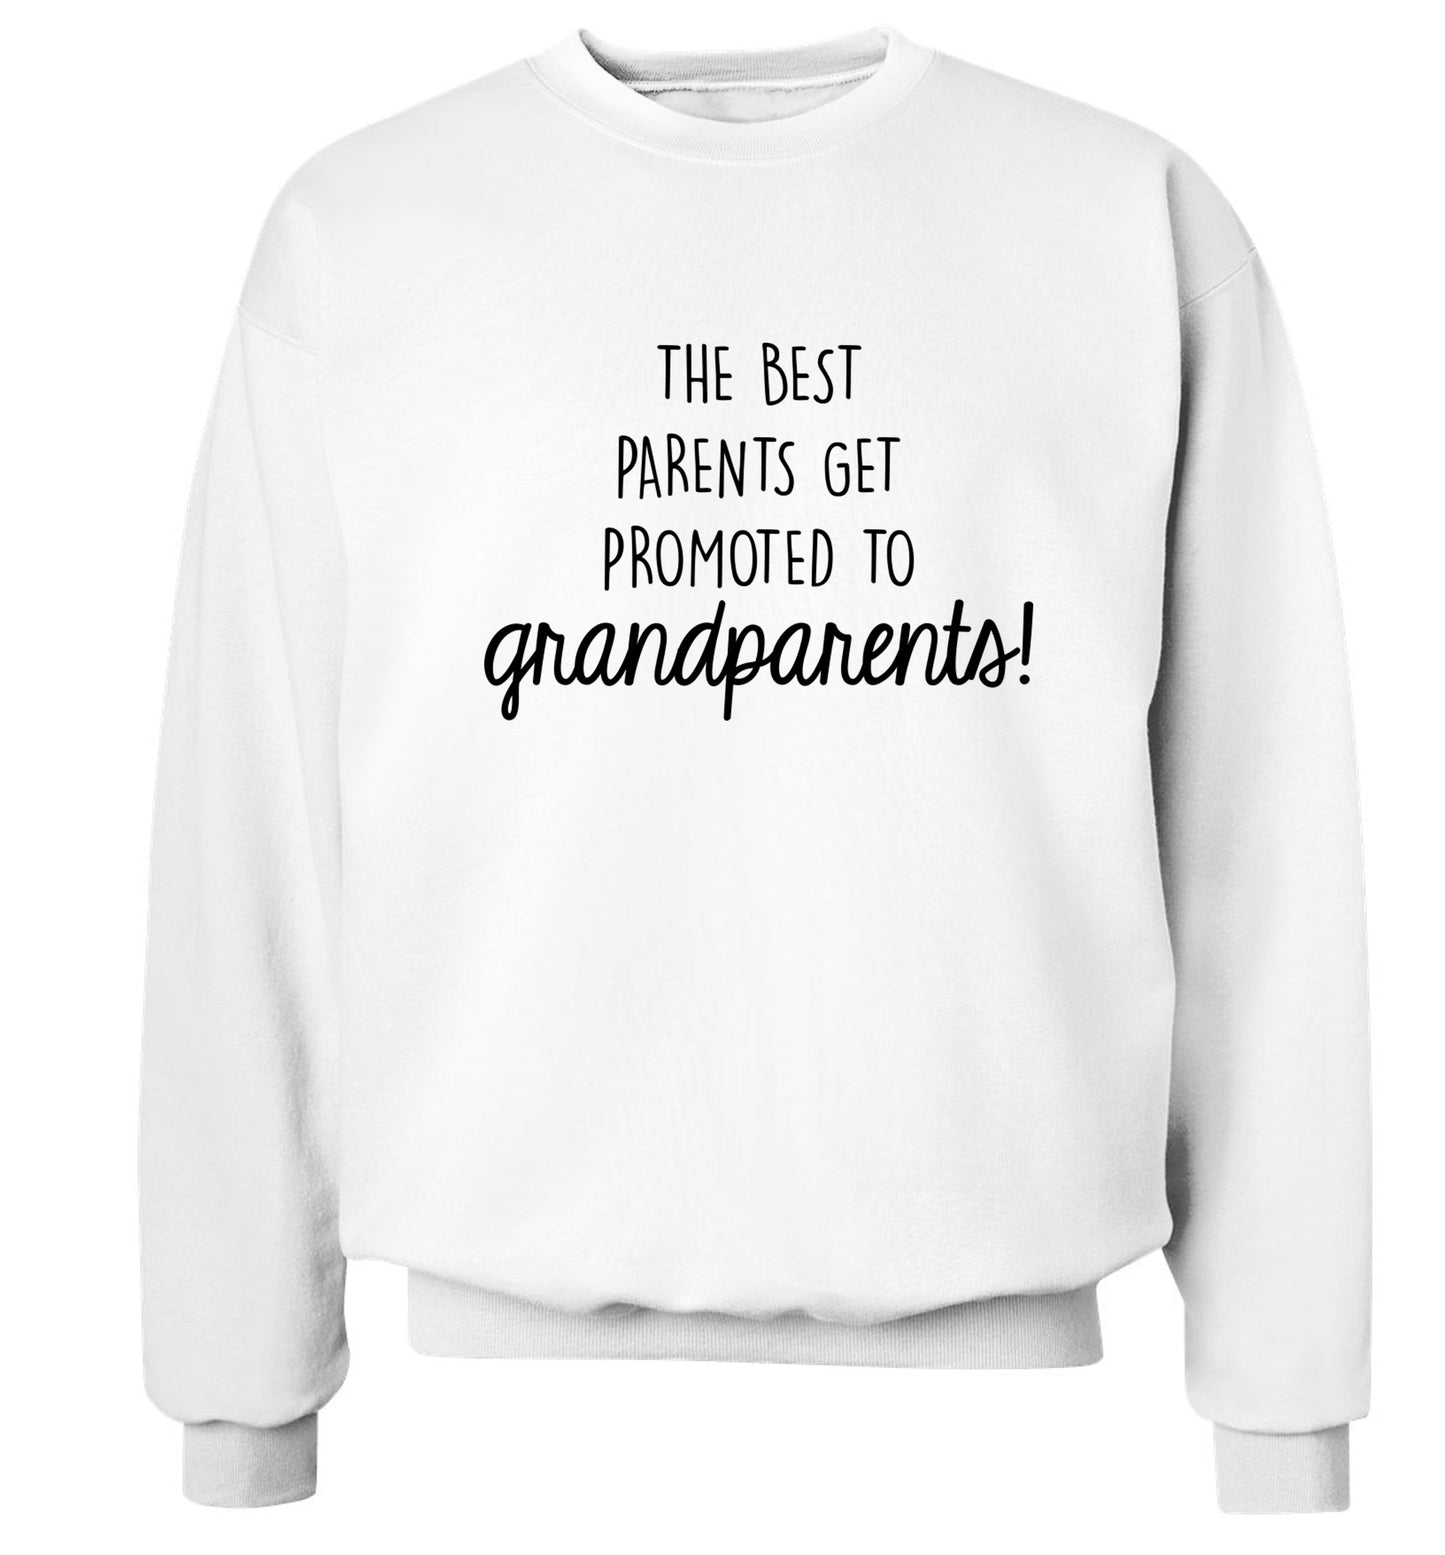 The best parents get promoted to grandparents Adult's unisex white Sweater 2XL